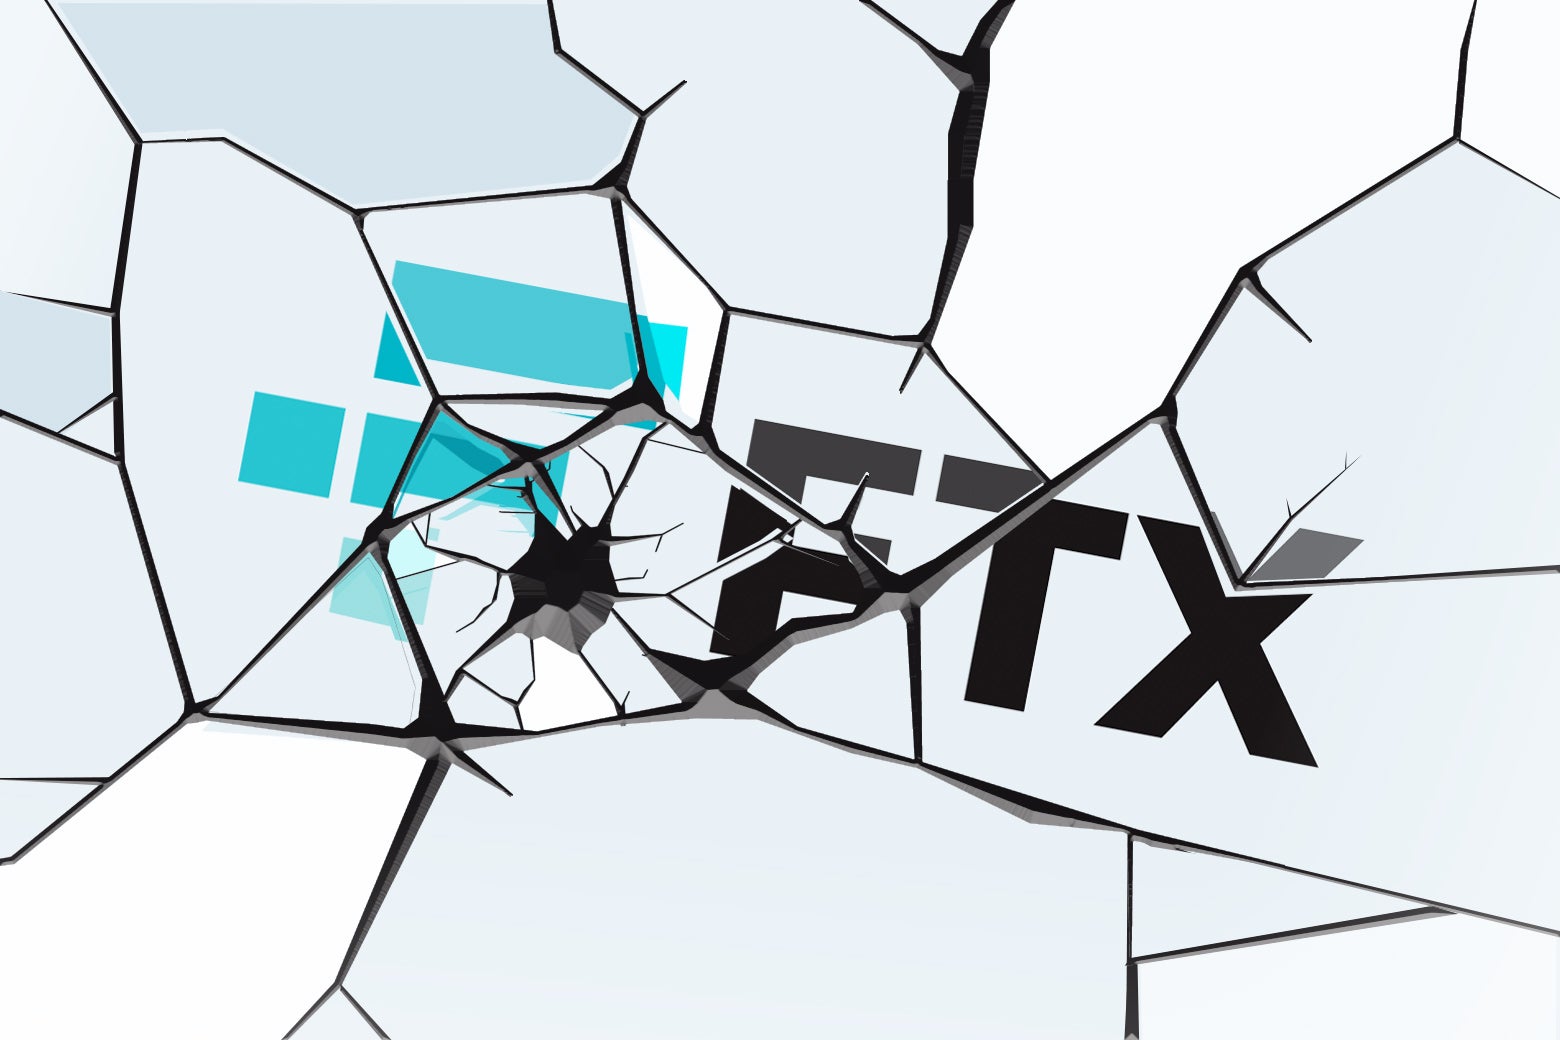 Illustration of a cracked FTX logo on glass.